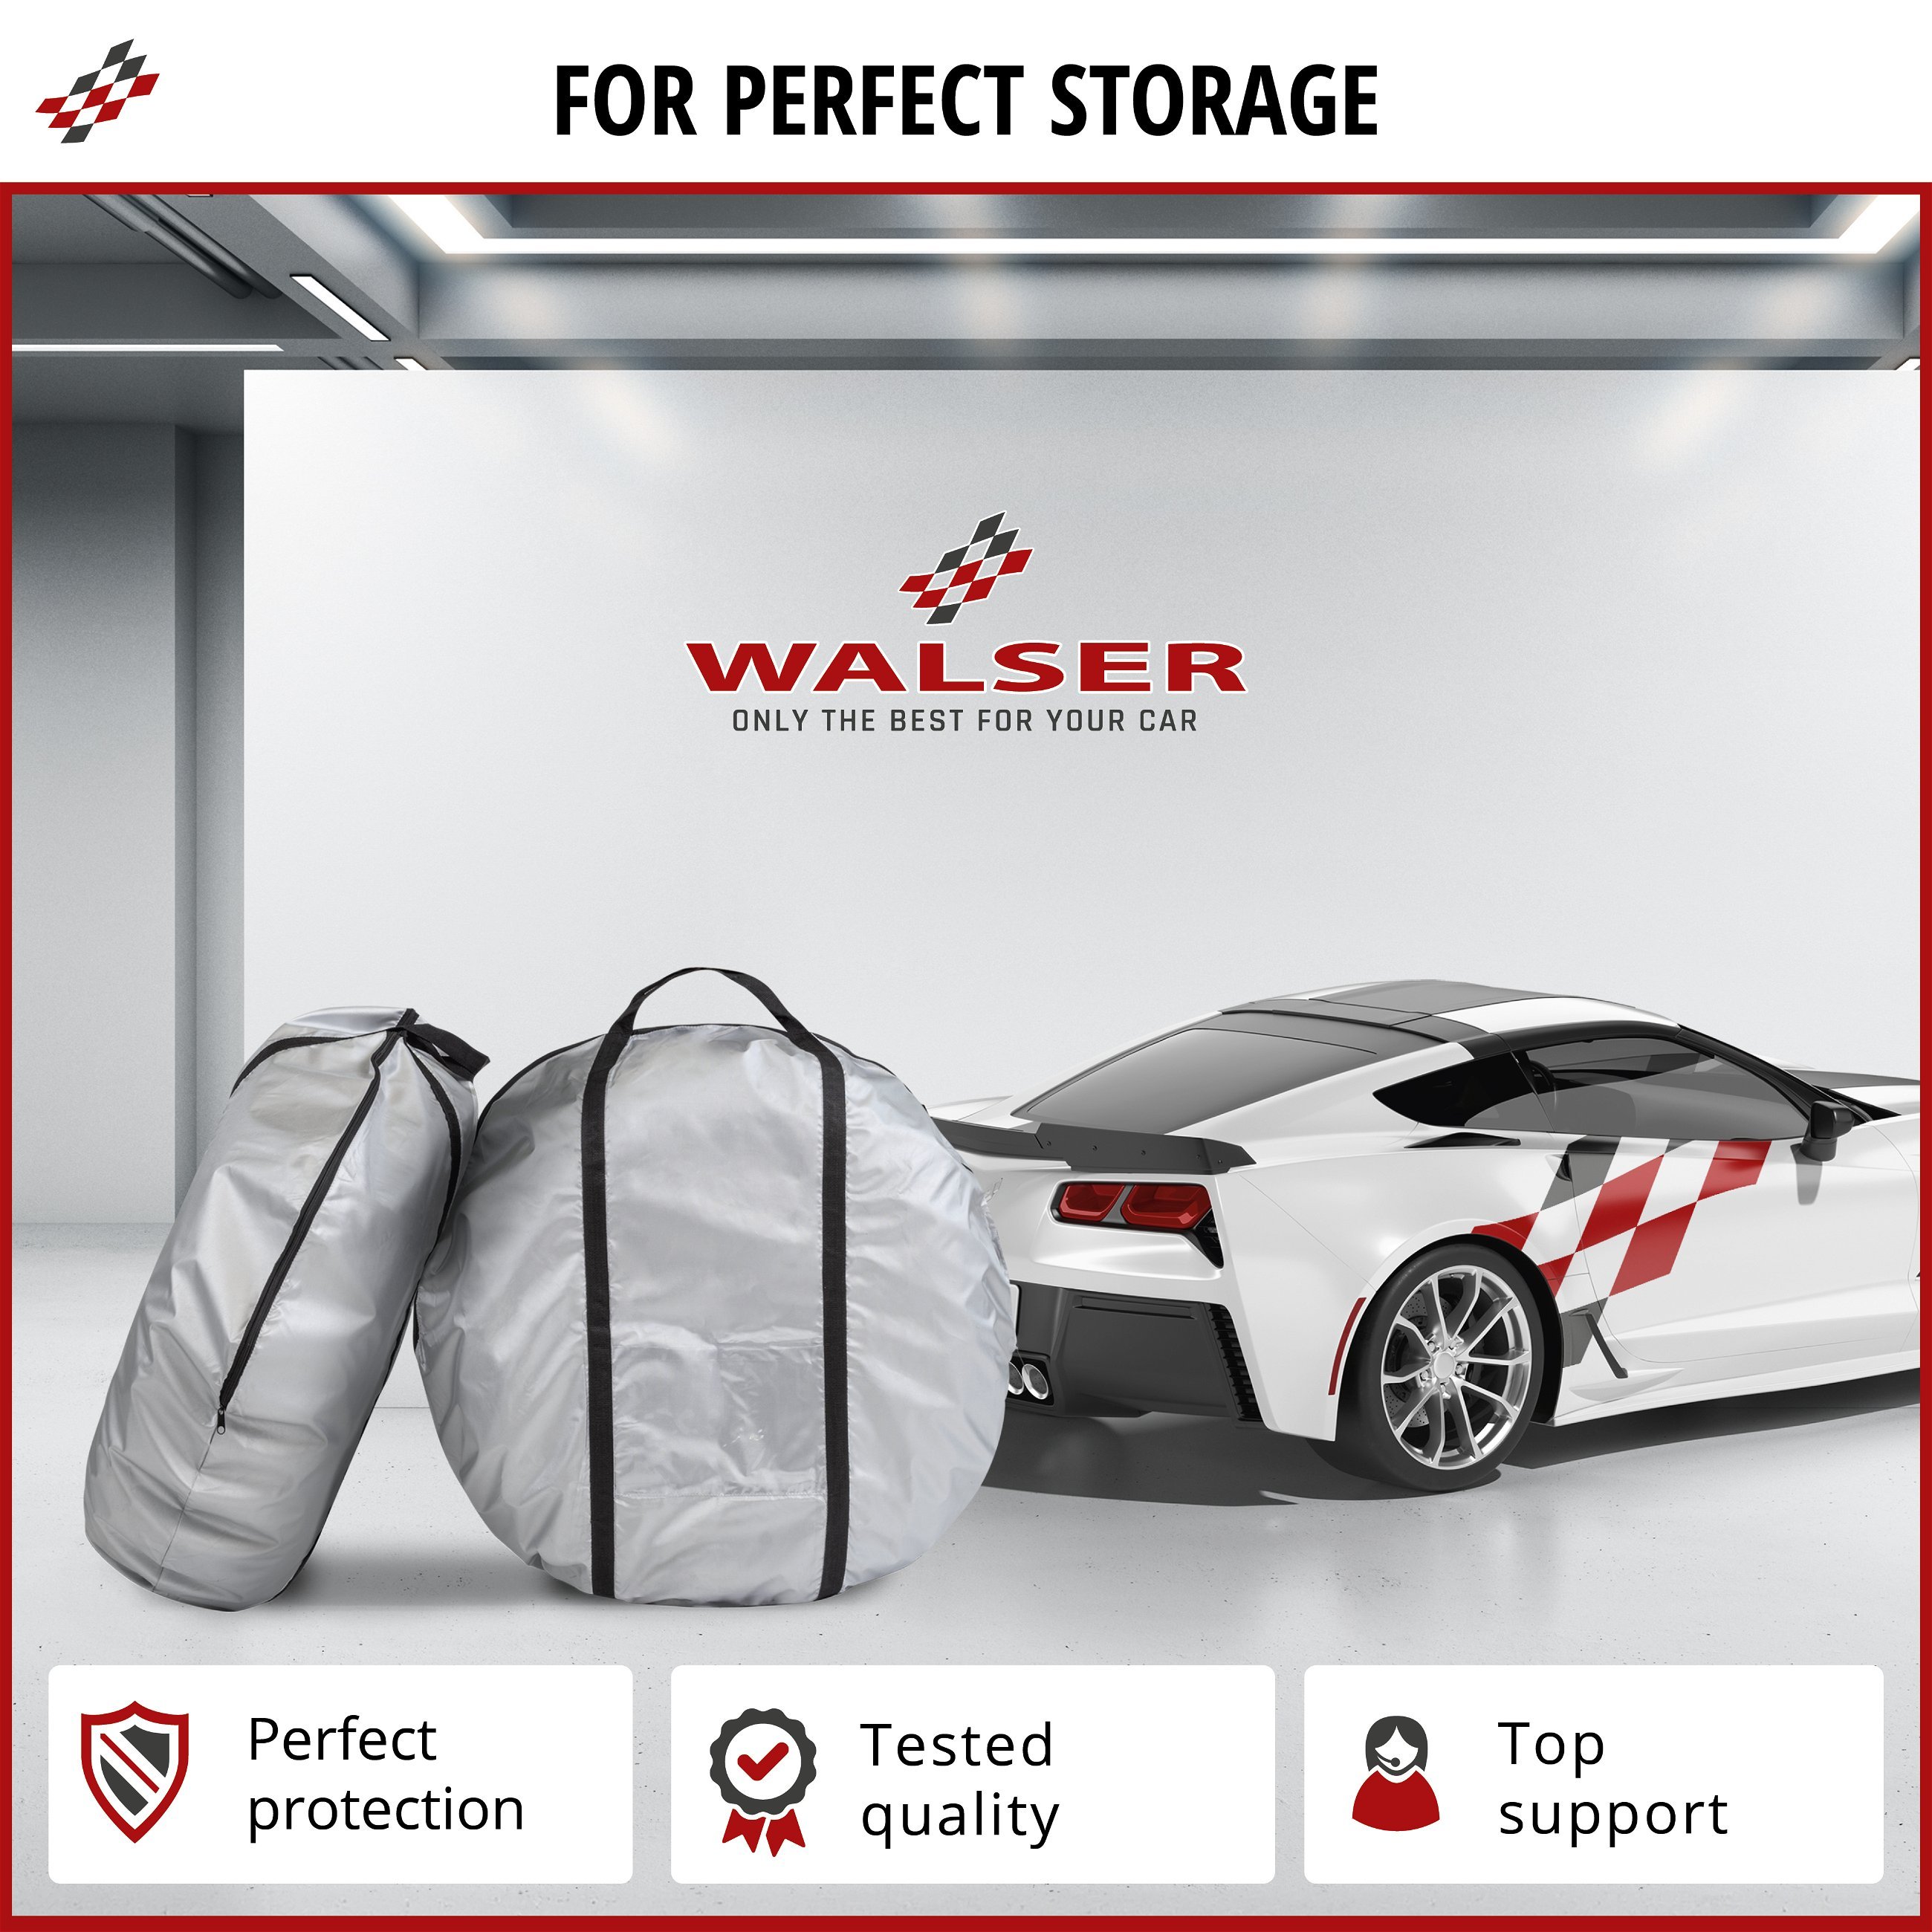 Tire storage Bag size M, tyre bag 15-16 inch tyres silver